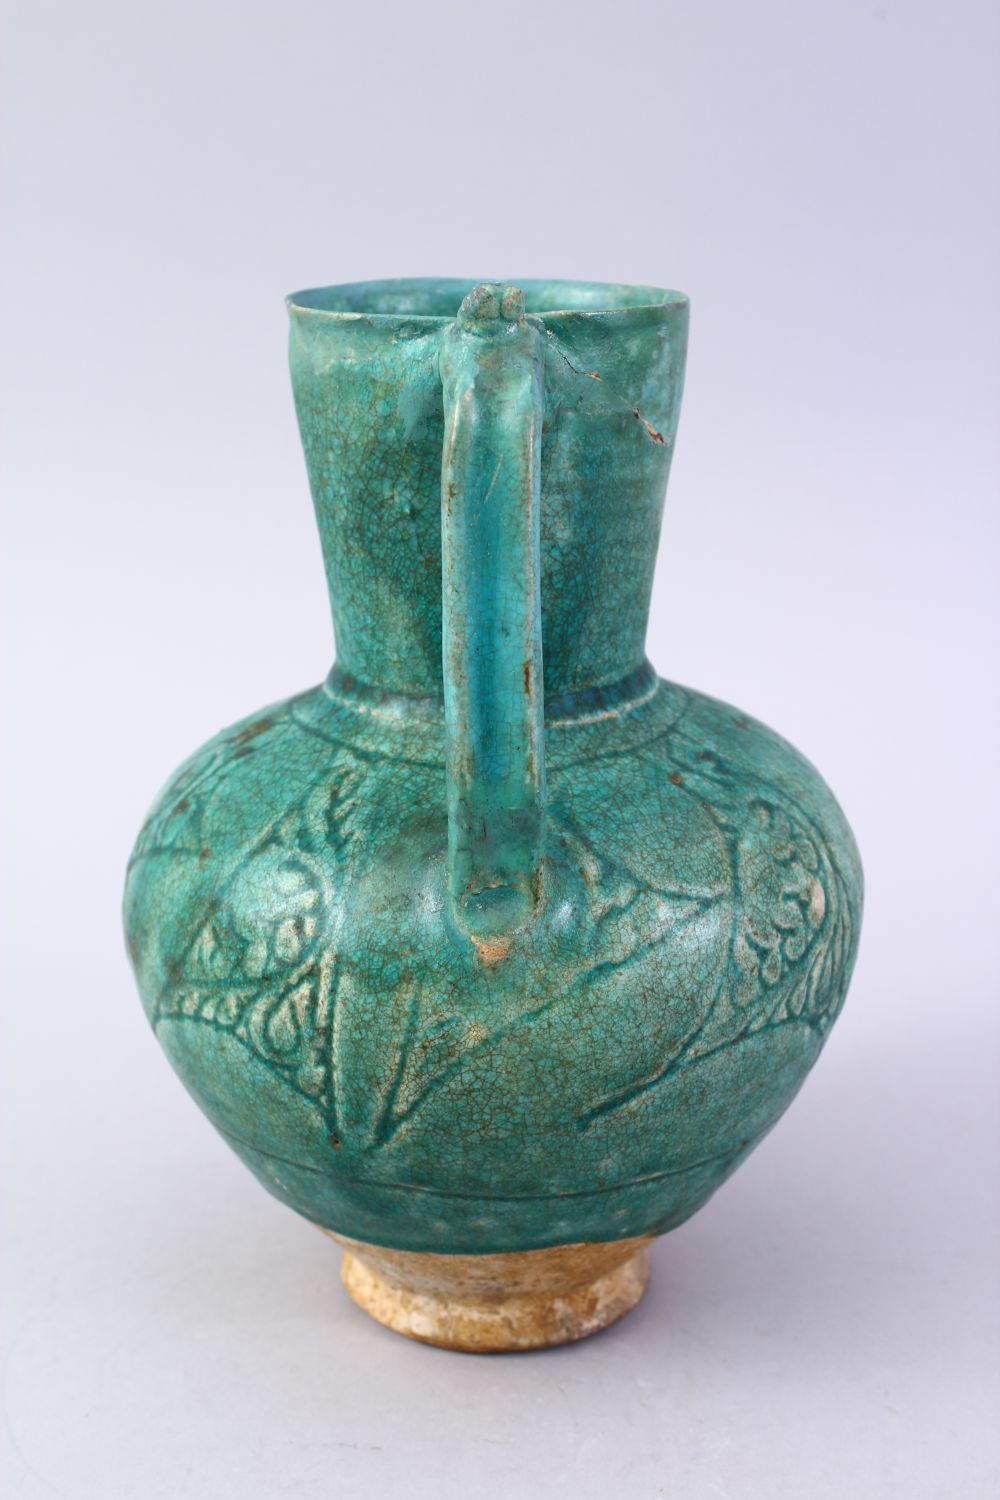 A GOOD EARLY ISLAMIC TURQUOISE GLAZED POTTERY JUG, 22cm high. - Image 4 of 9